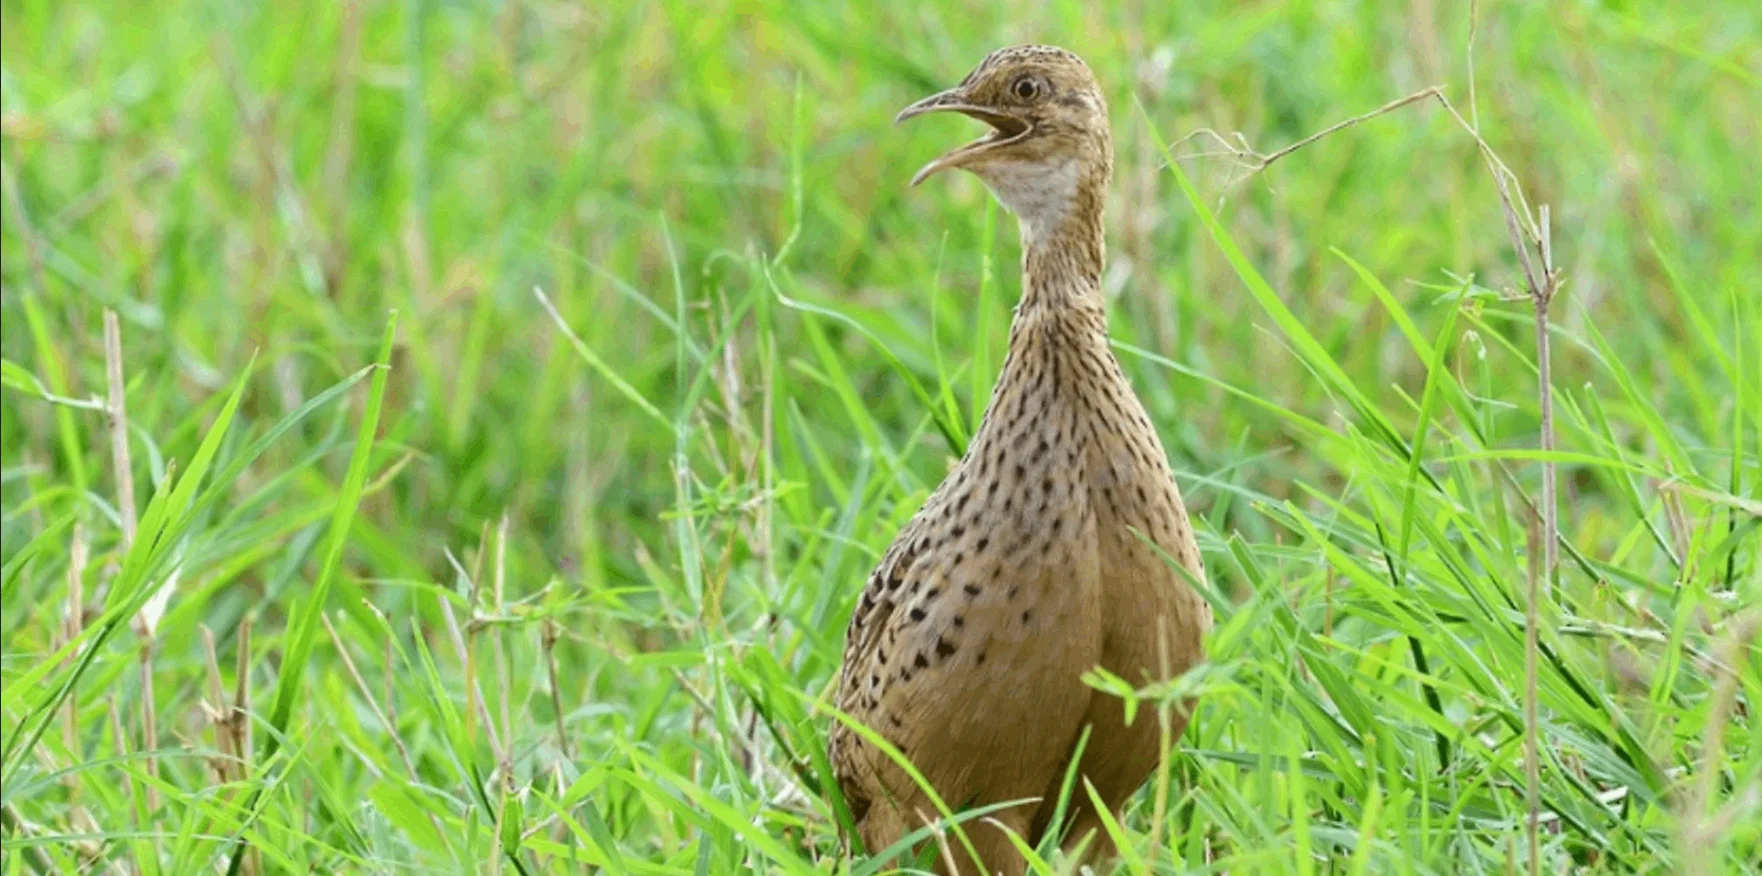 A Spotted Nothura (bird) stands in a grassy savanna with its beak open, singing